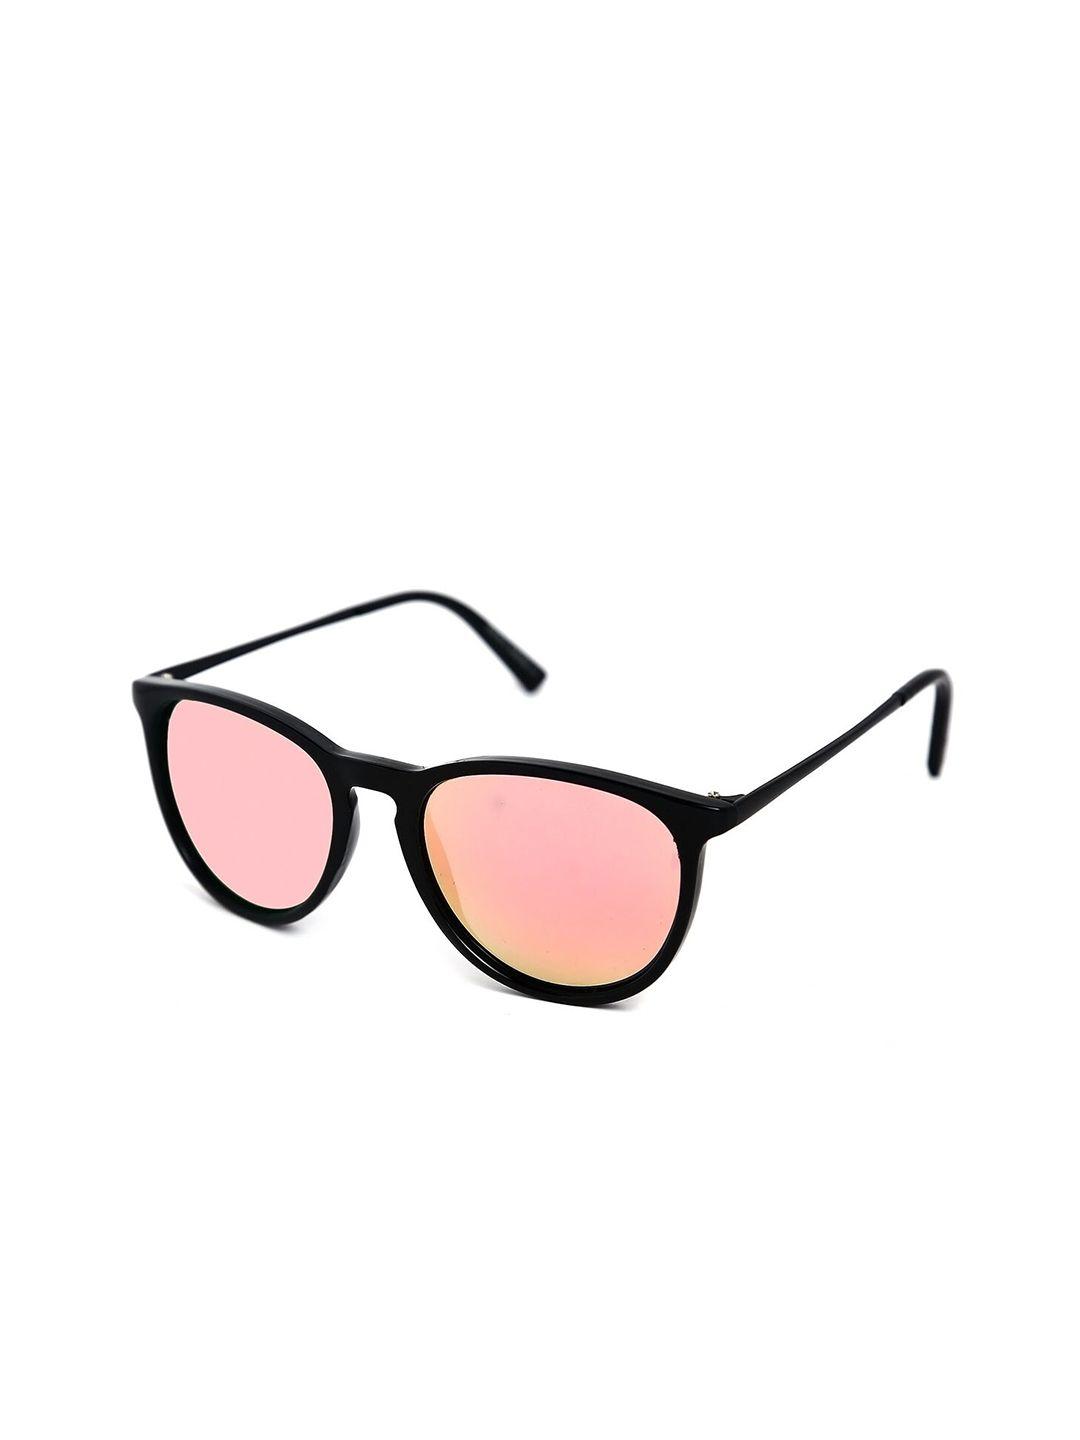 micelo martin unisex pink lens & black round sunglasses with uv protected lens mm2002 c8